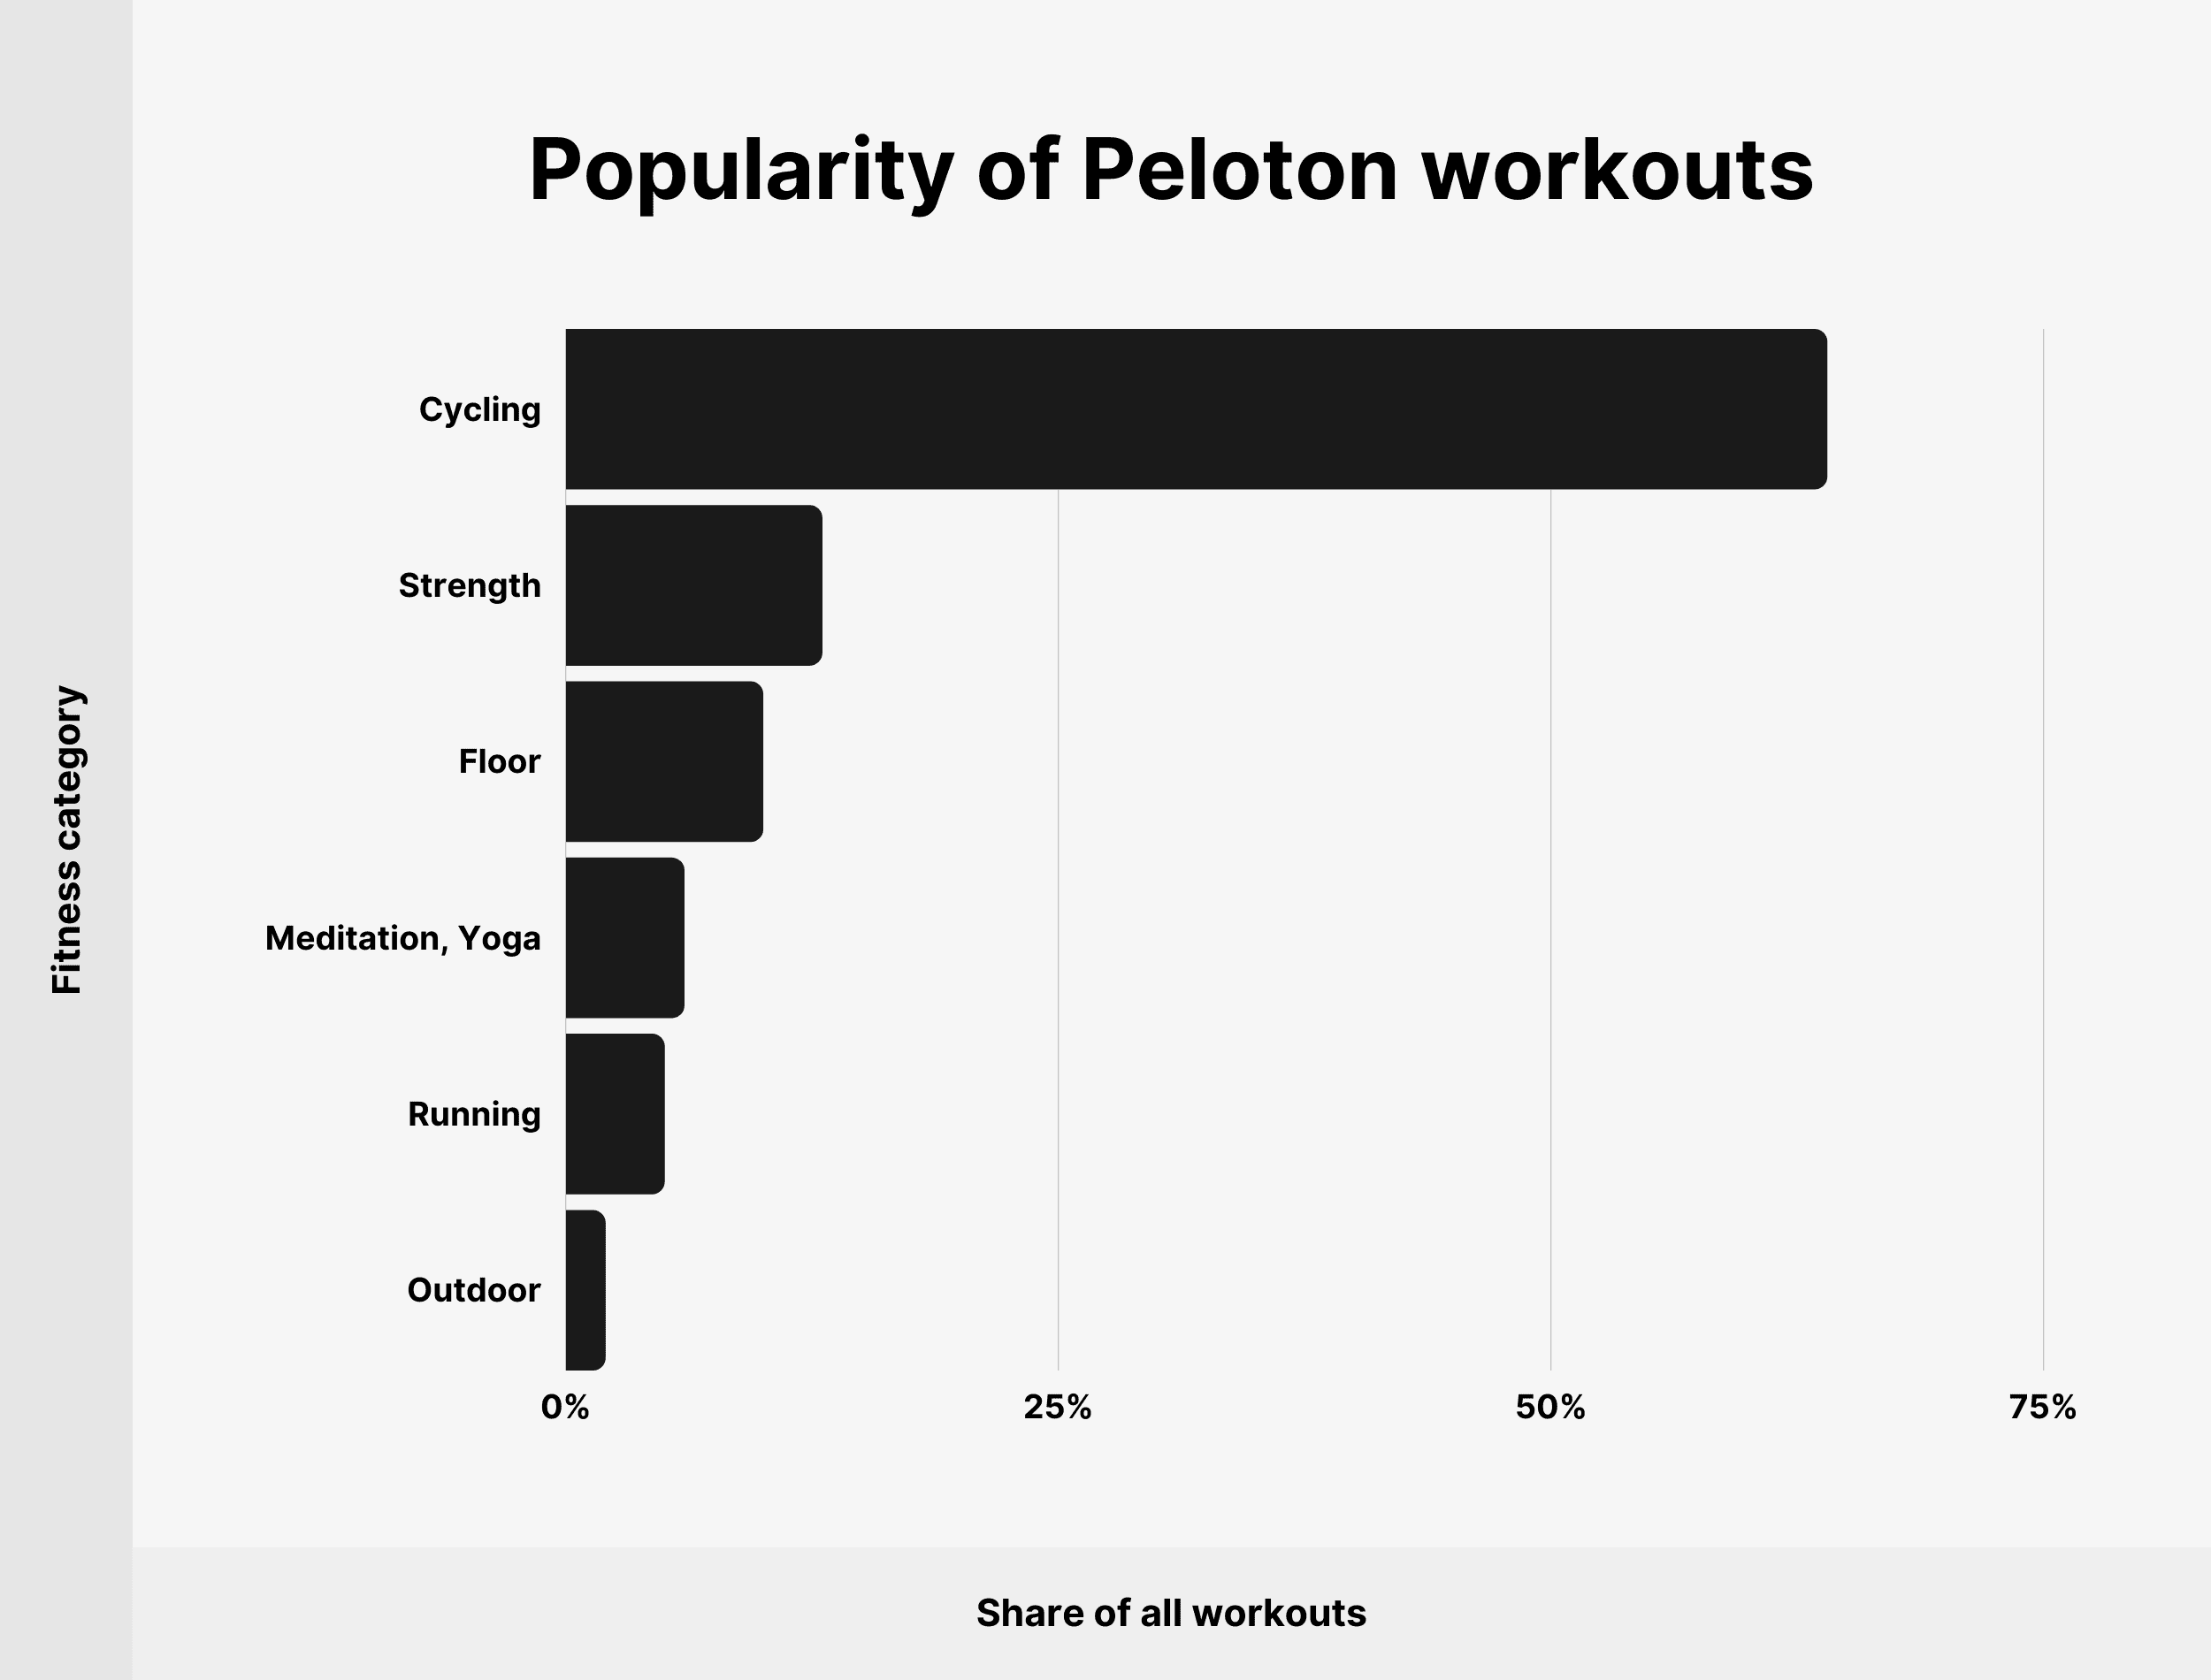 Popularity of Peloton workouts